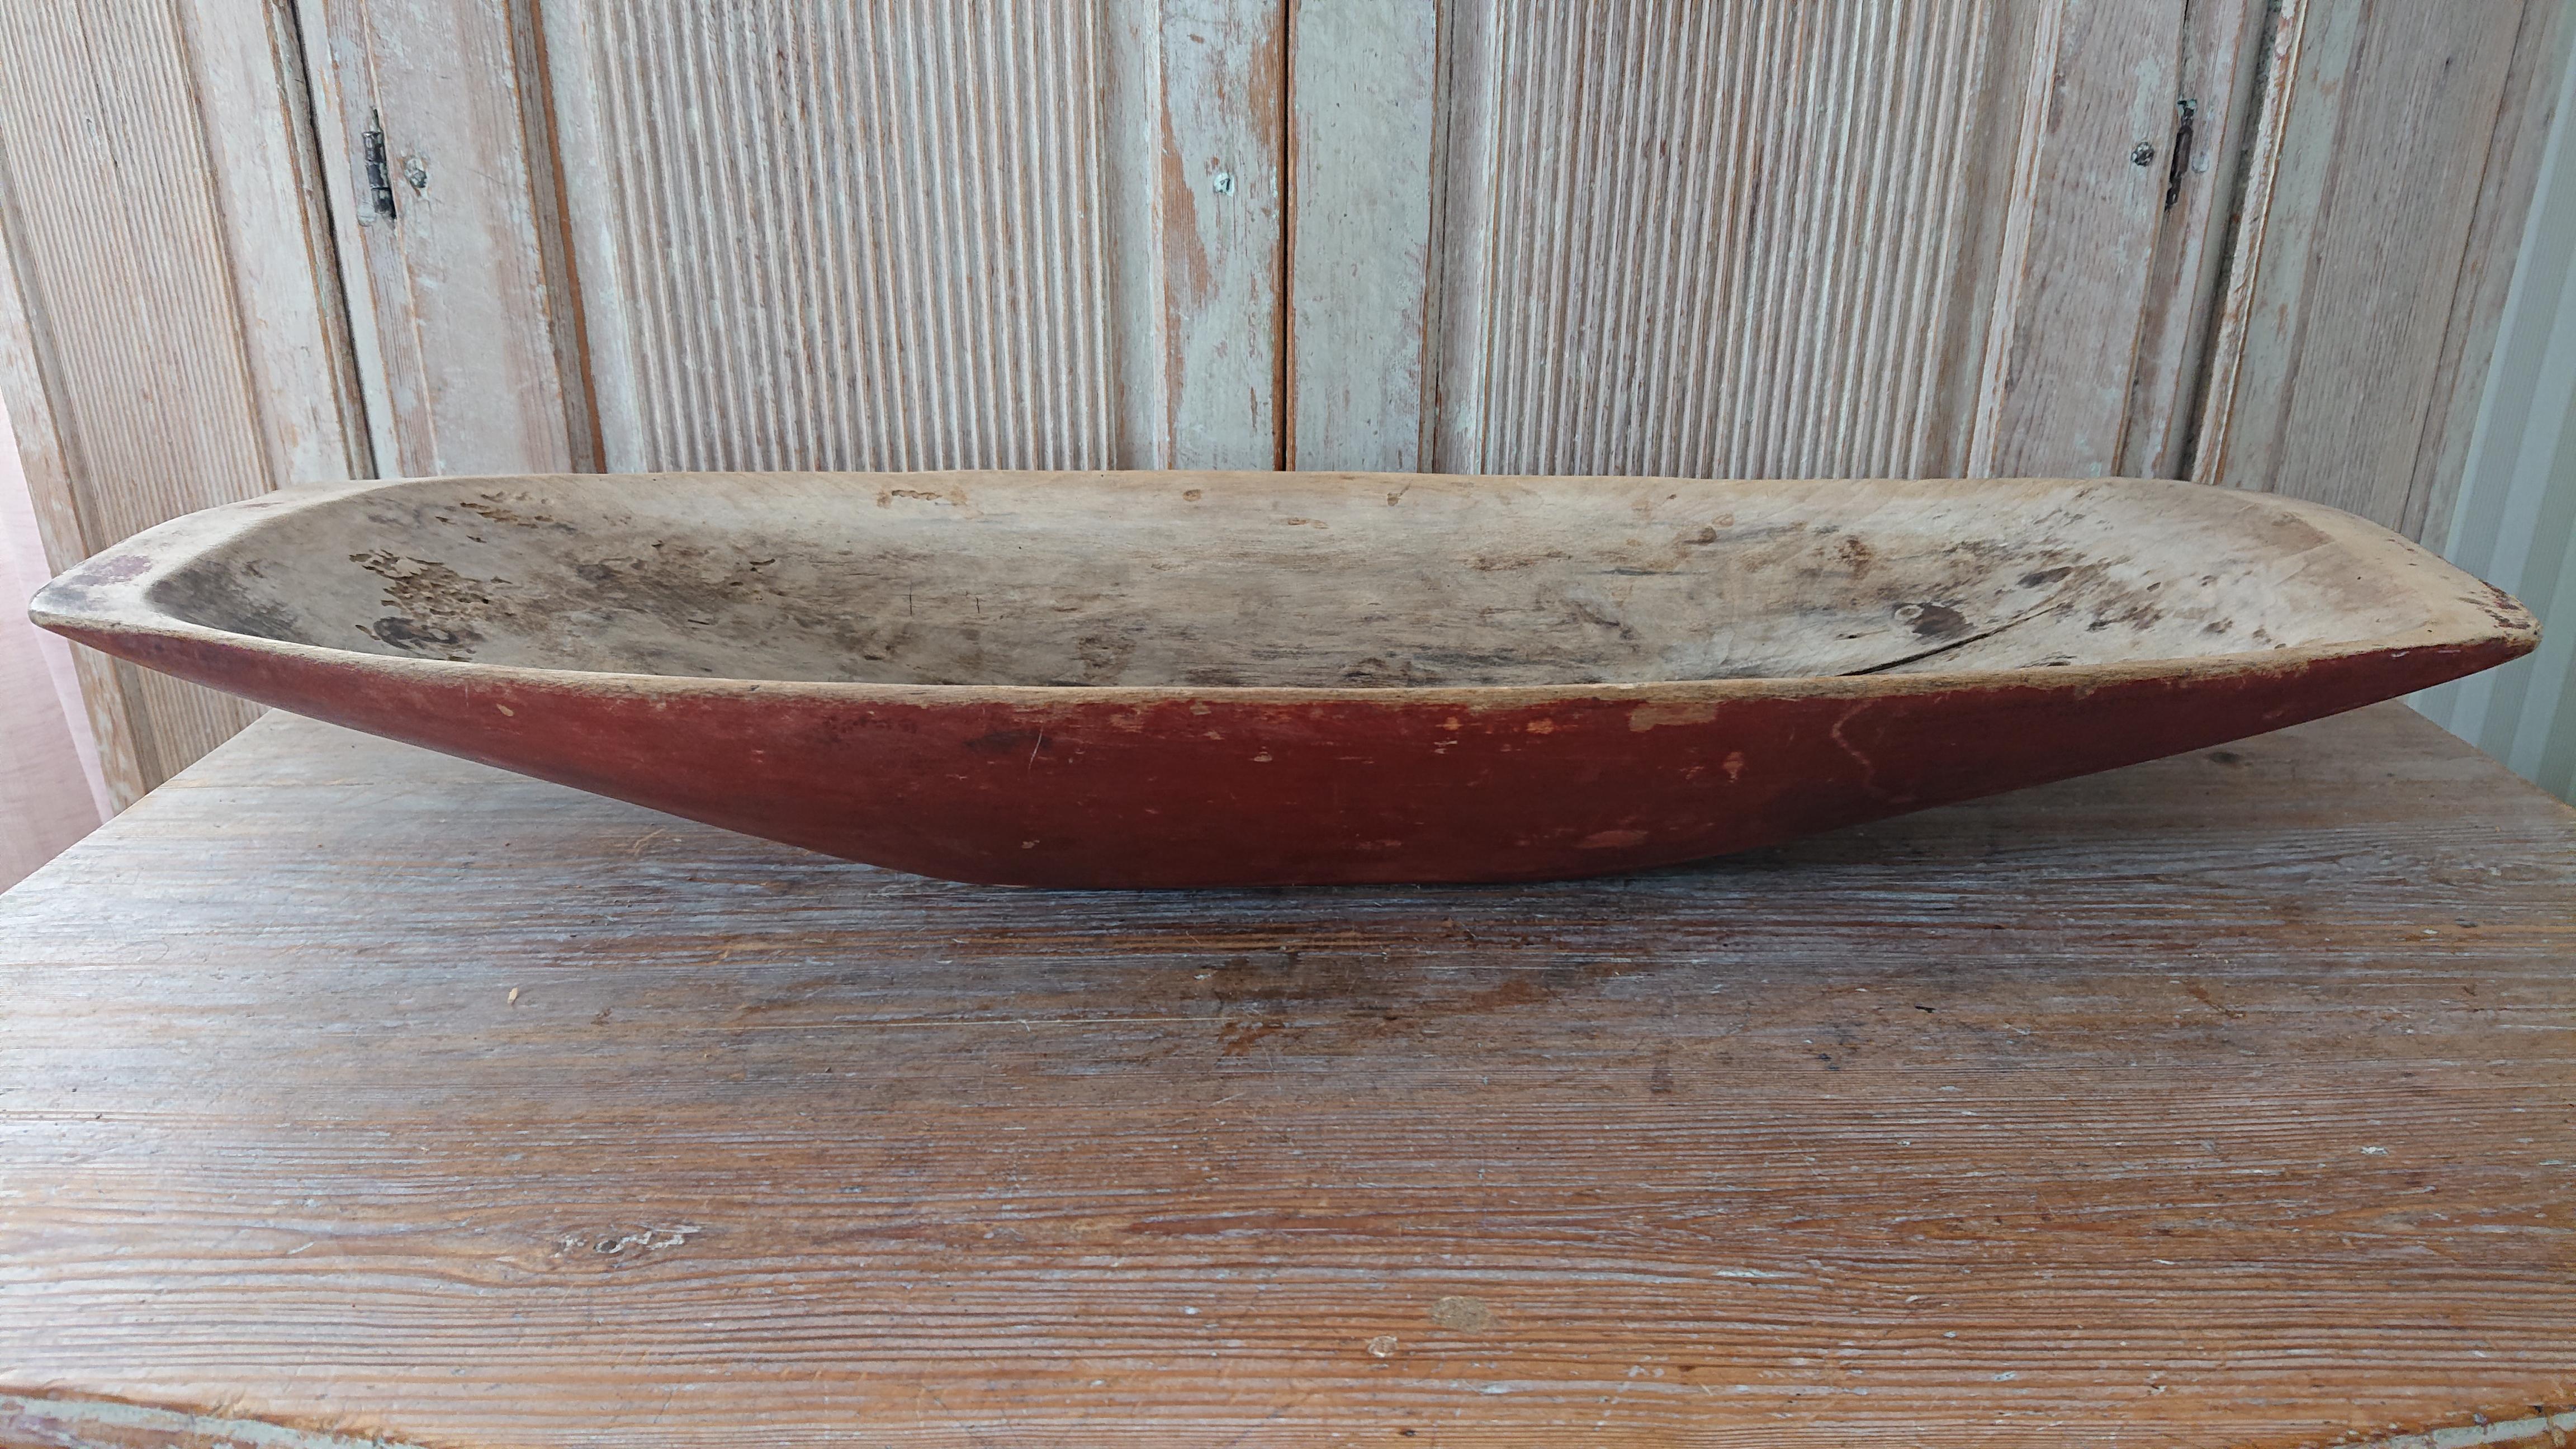 18th Century Swedish Folk Art tray / serving bowl from Borlänge Dalarna, Northern Sweden
A fantastically early tray dated 1782.
It also has cut marks on the underside.
The tray has untouched original paint.
A large farmers handcrafted tray or